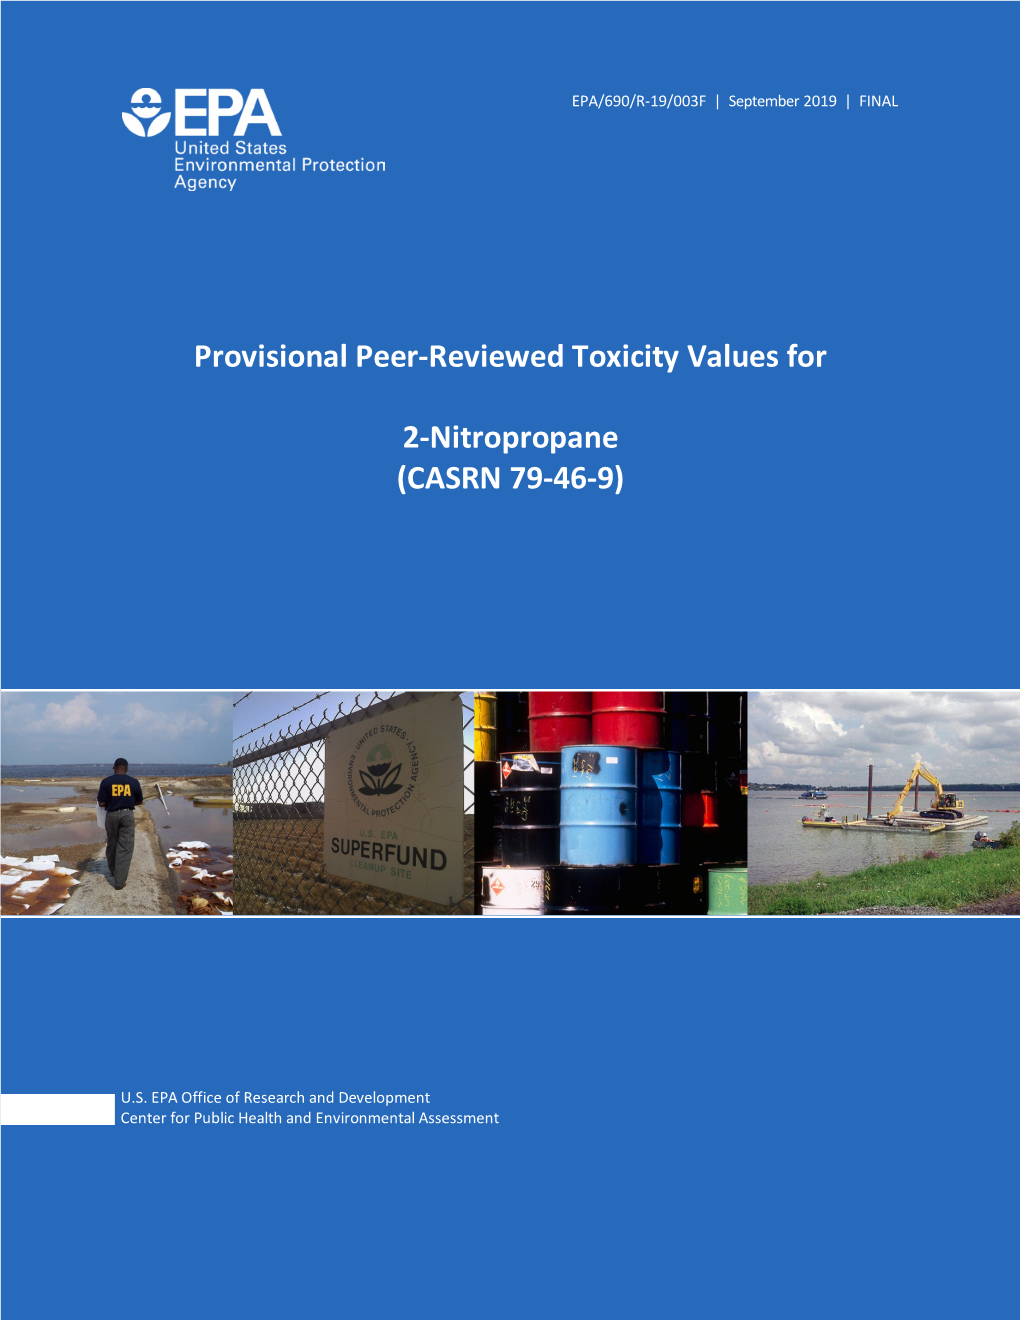 Provisional Peer Reviewed Toxicity Values for 2